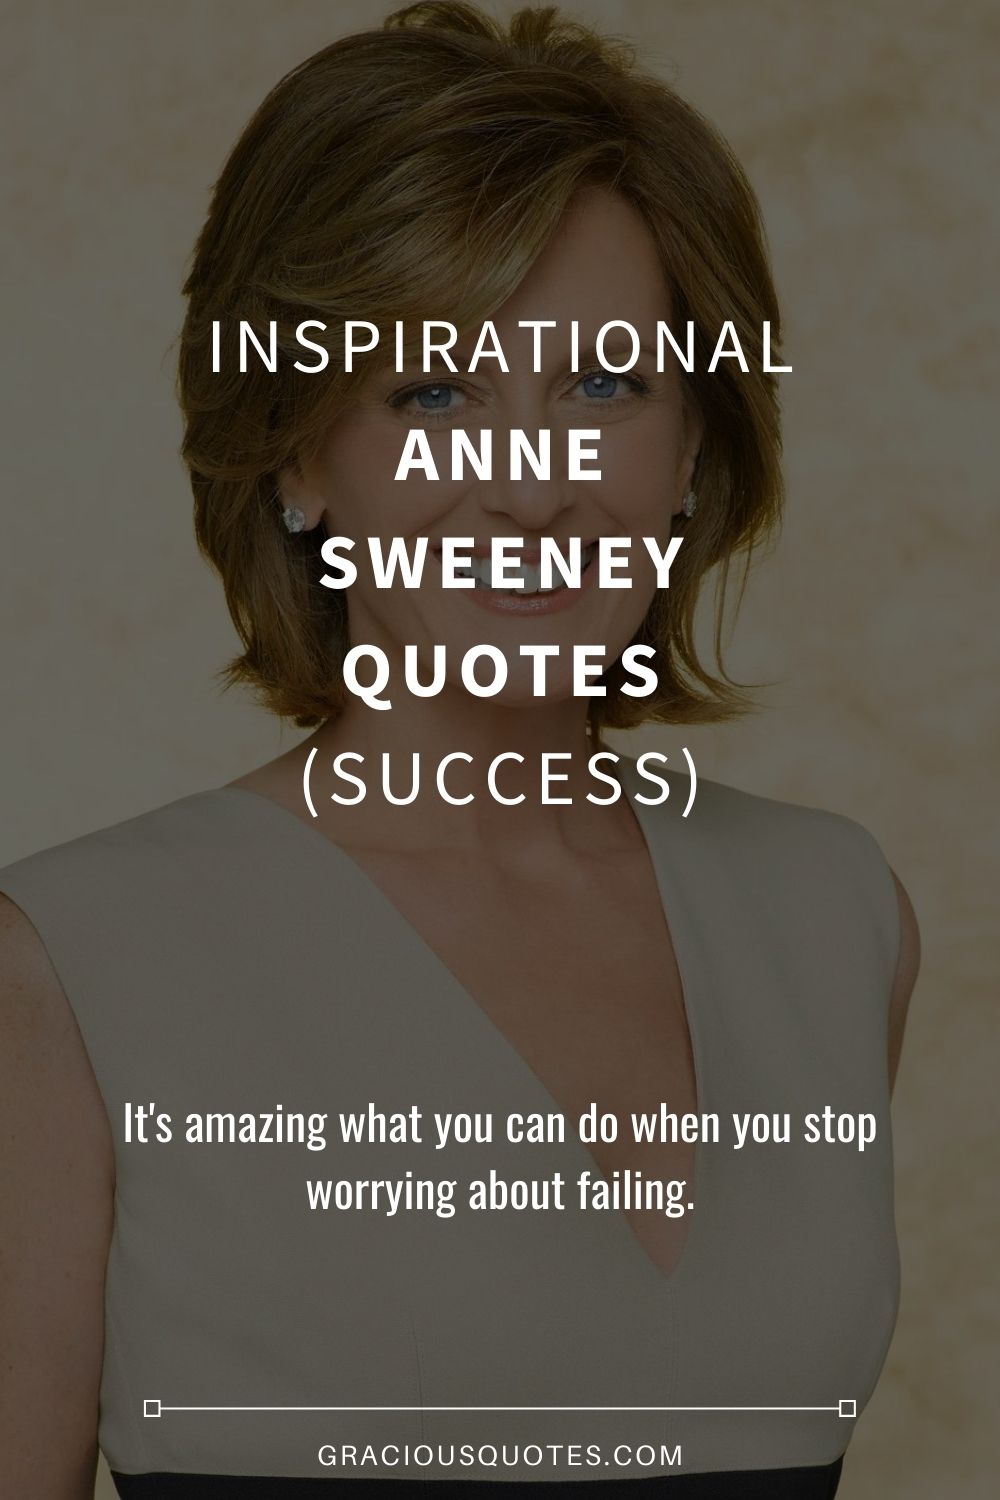 Inspirational Anne Sweeney Quotes (SUCCESS) - Gracious Quotes